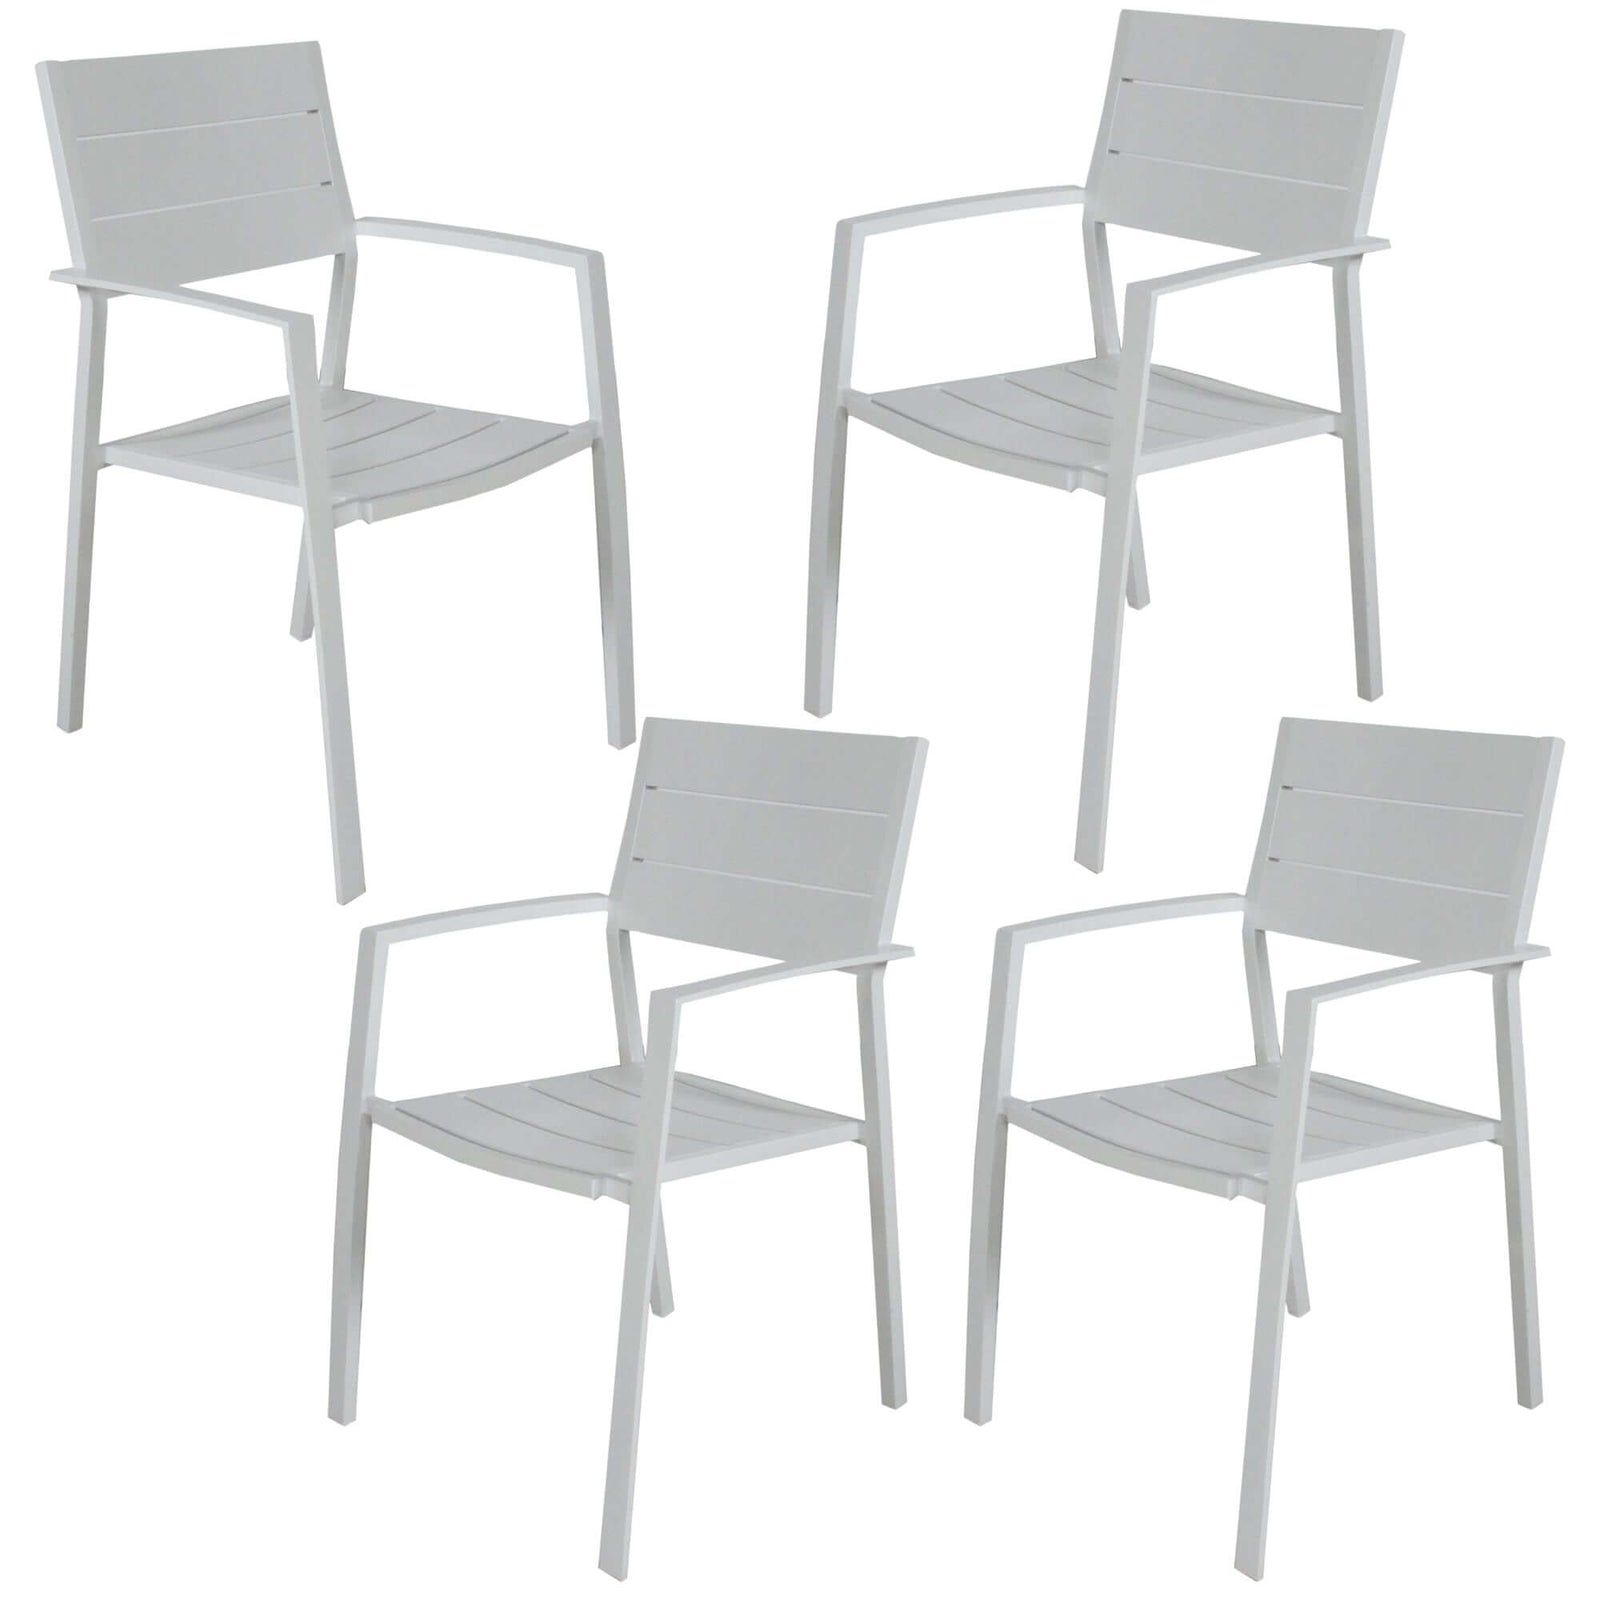 Percy 4pc Set Outdoor Dining Table Chair Aluminium Frame White-Upinteriors